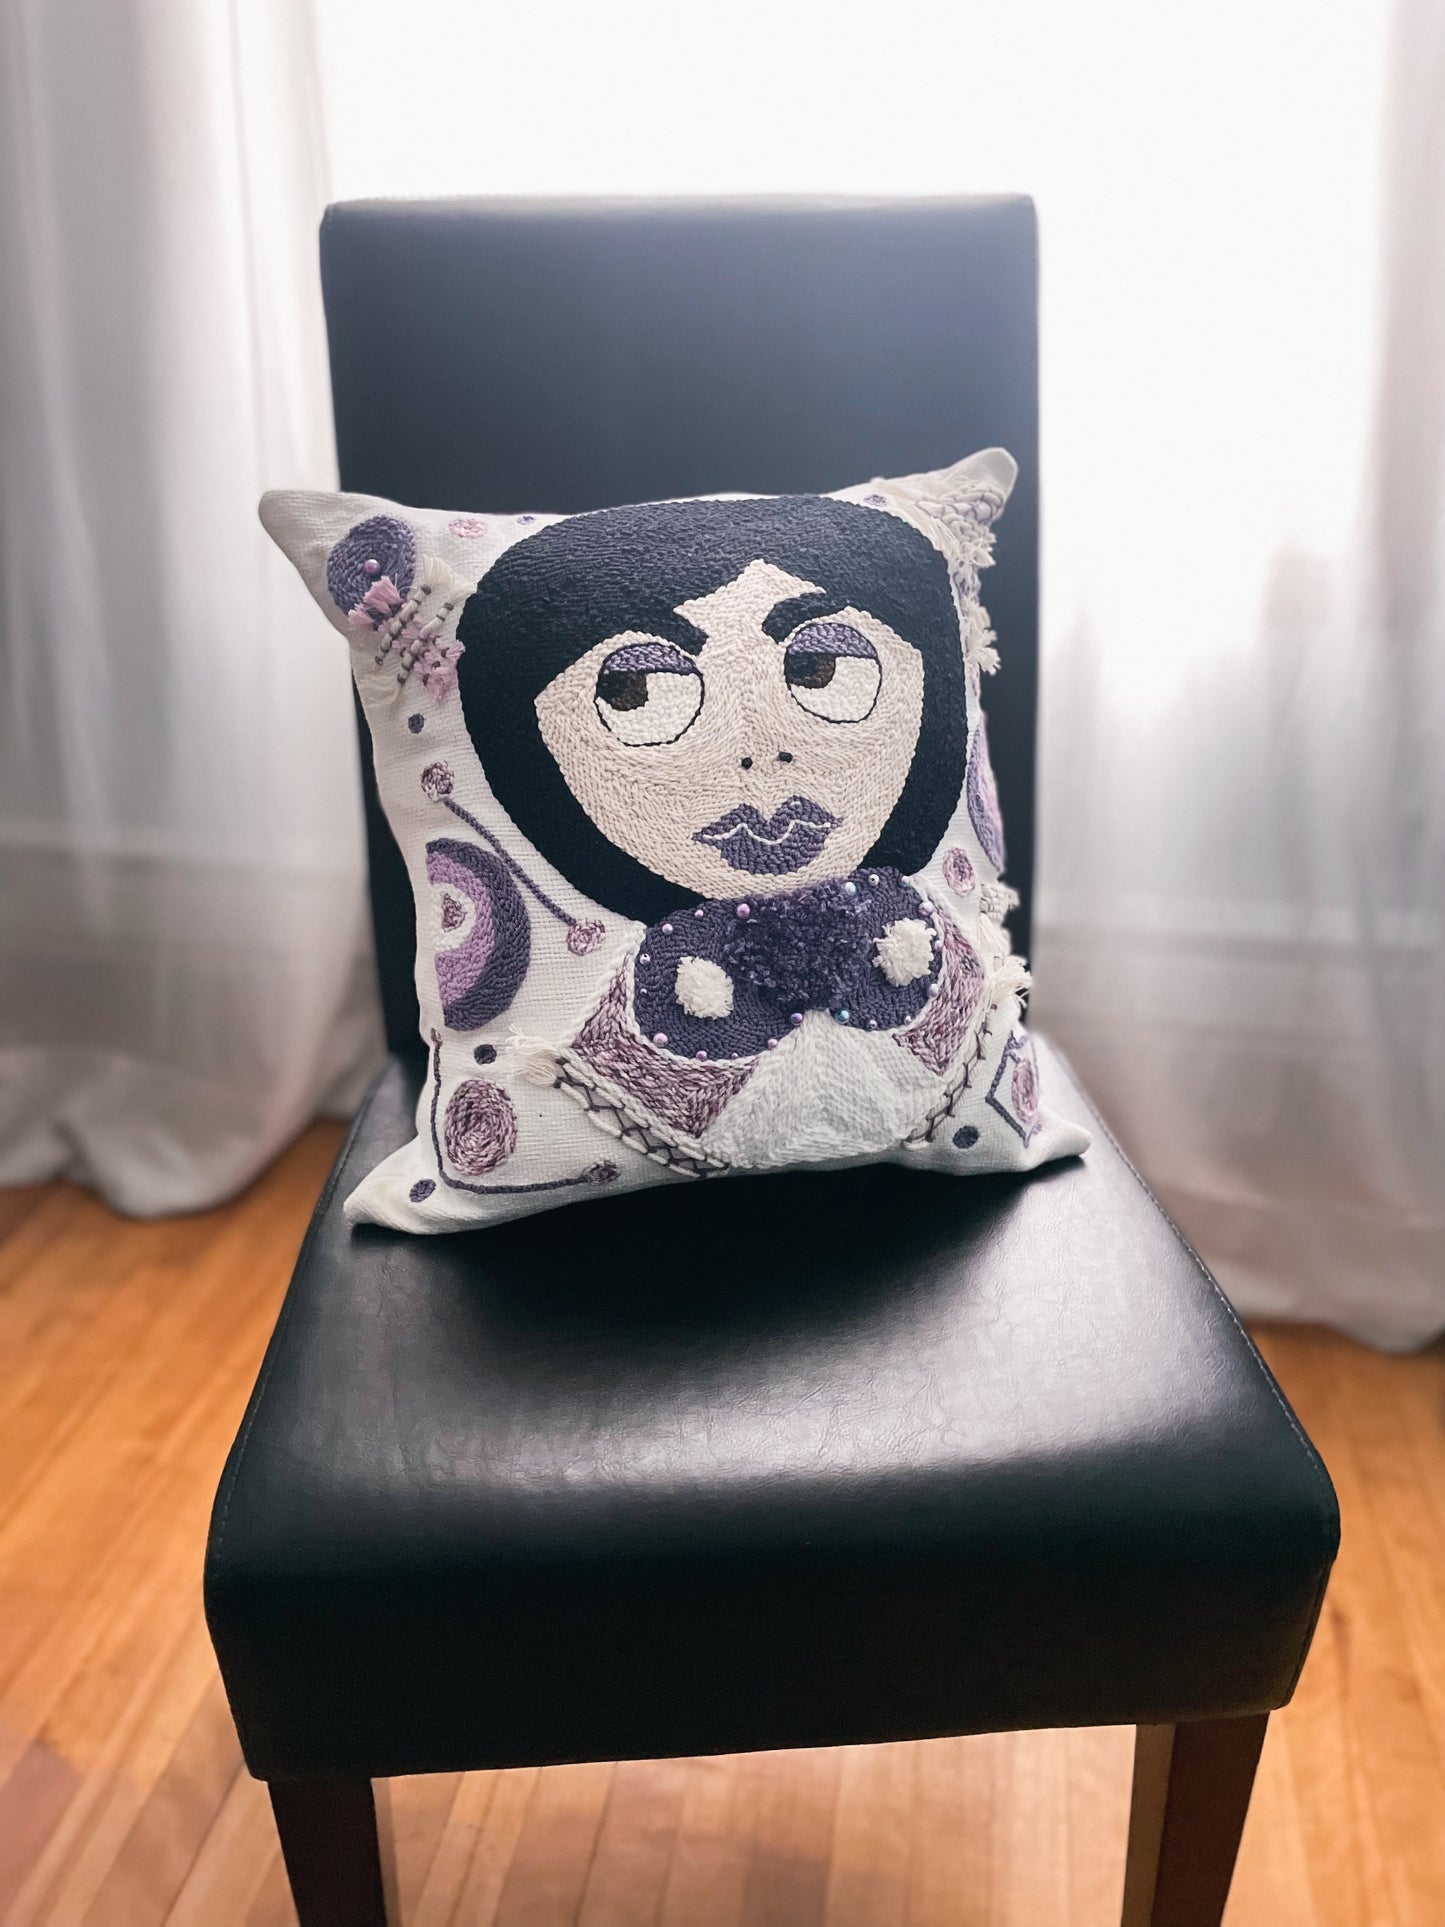 Miss Purple - Decorative Cushion Cover - Punch needle - Artistic